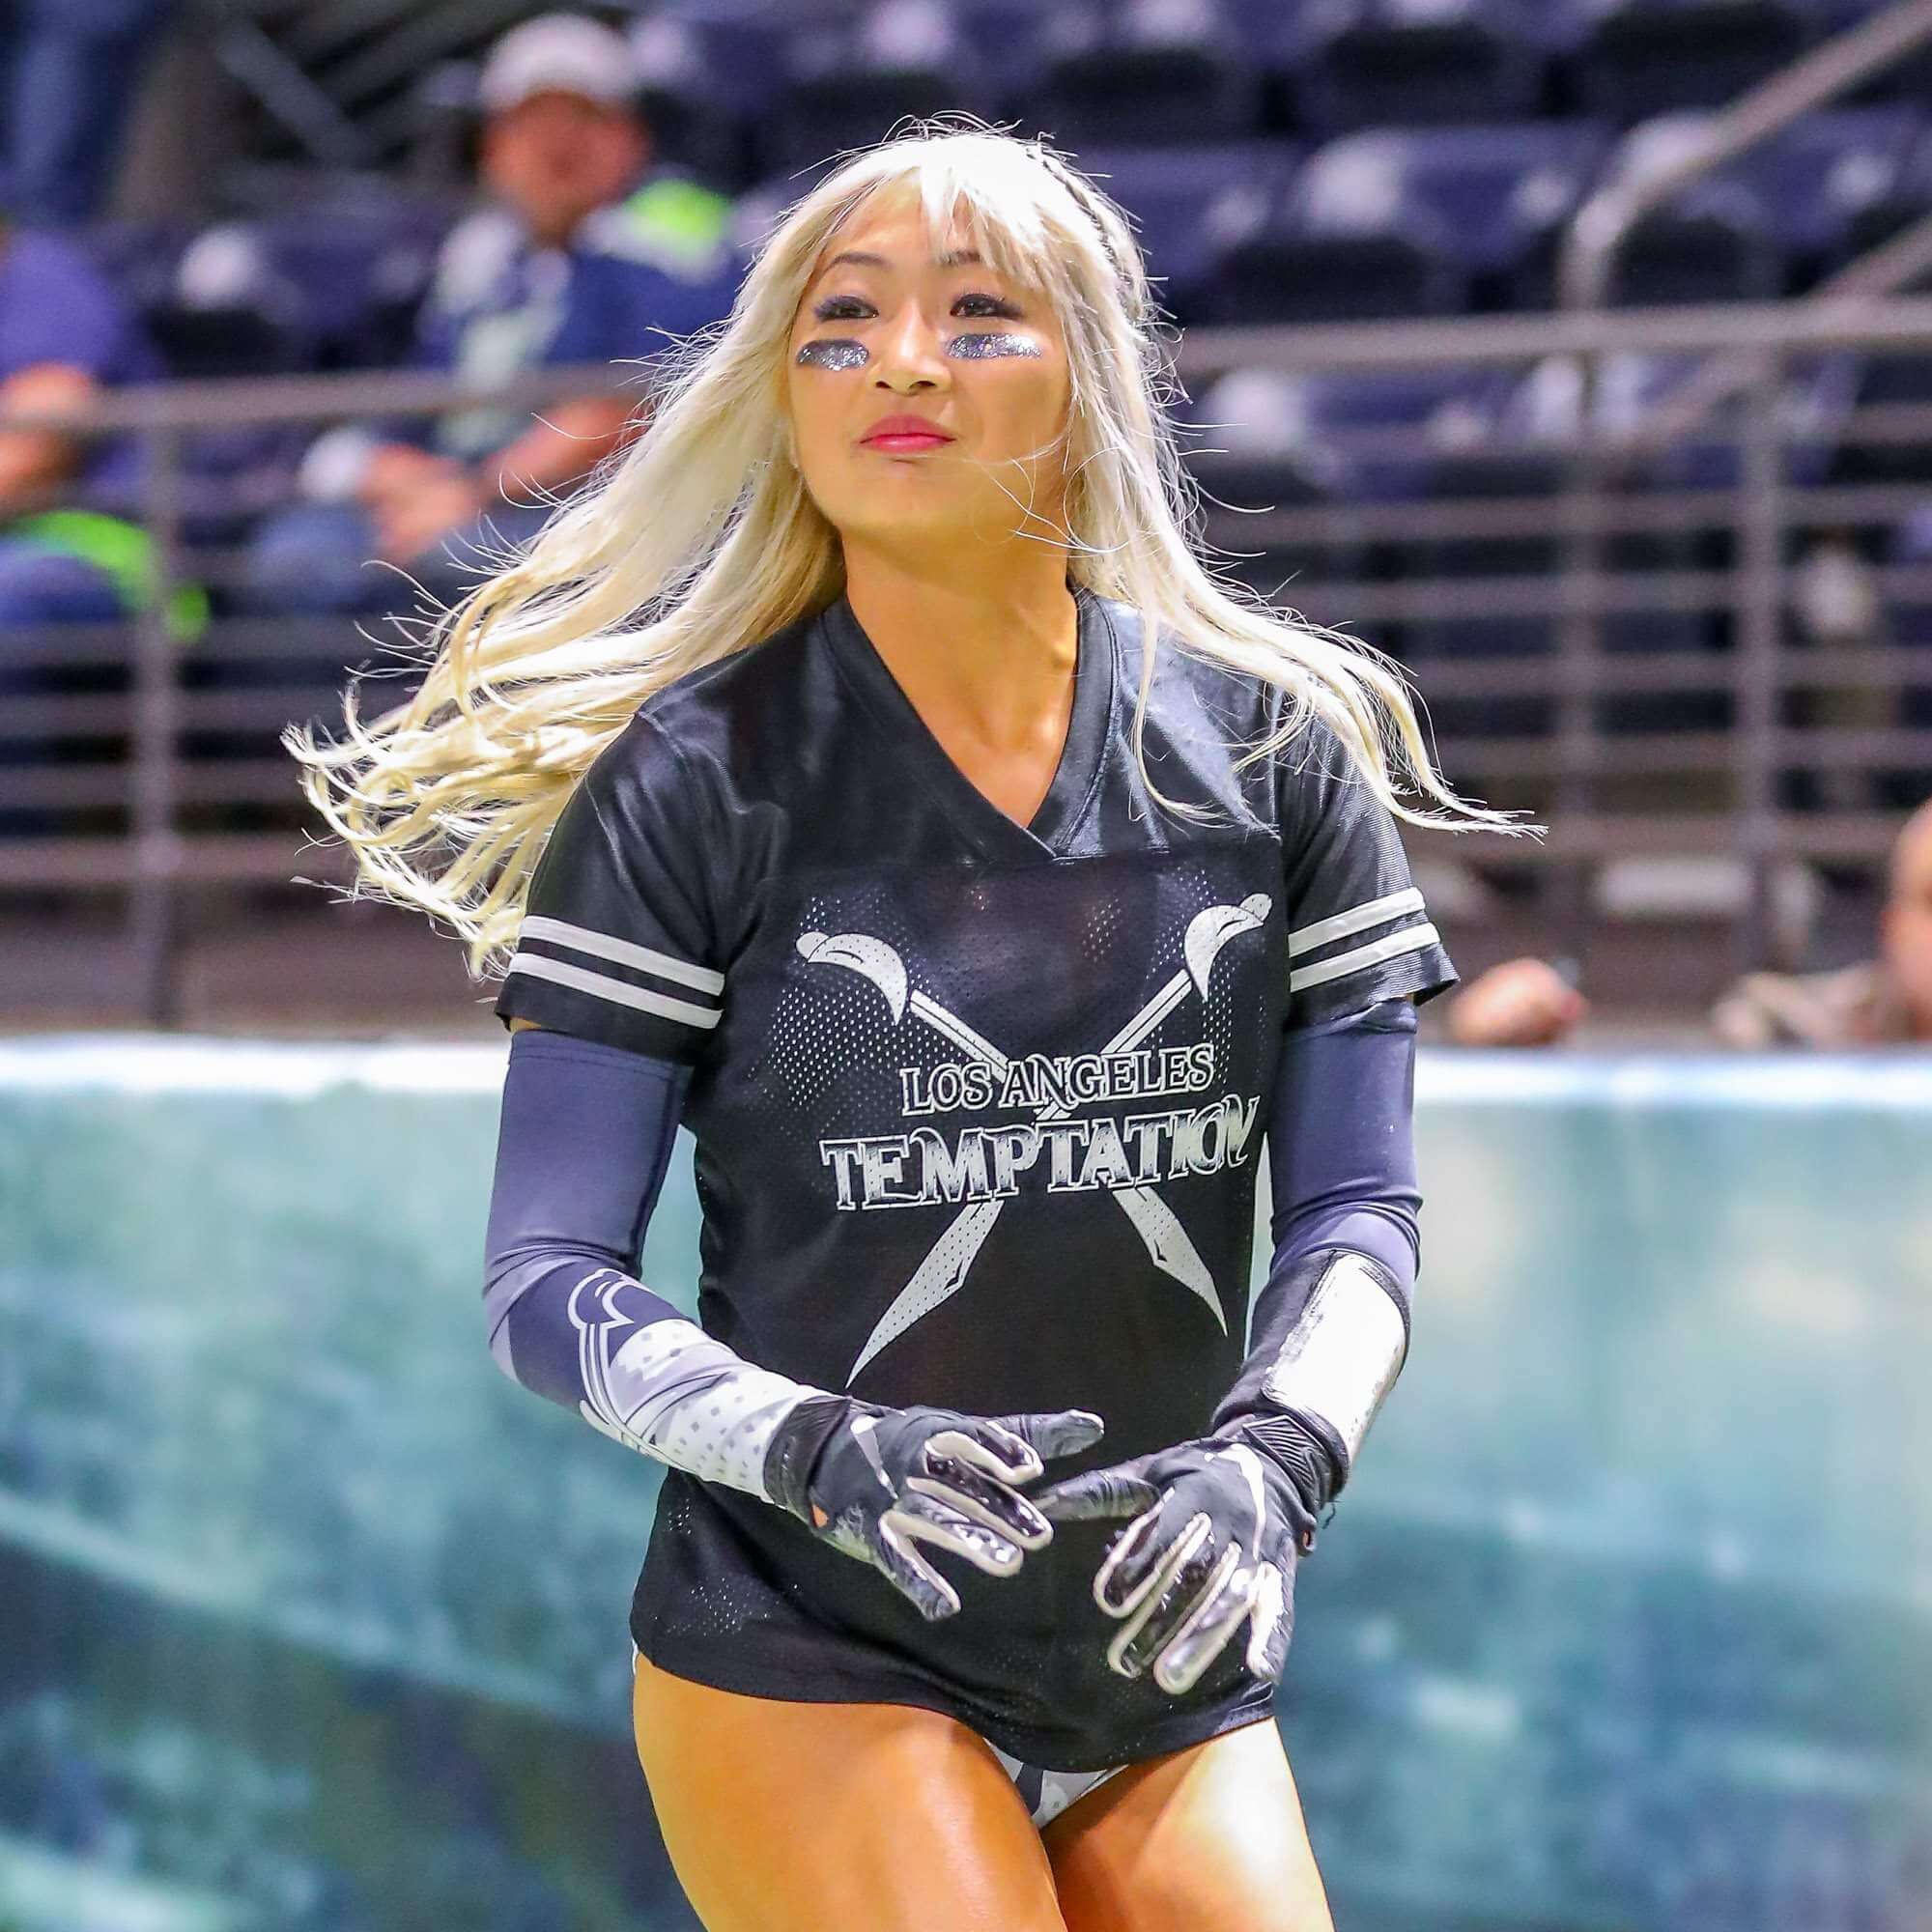 The Legends Football League Beautiful Women And Football, Need We Say Anymore! 25